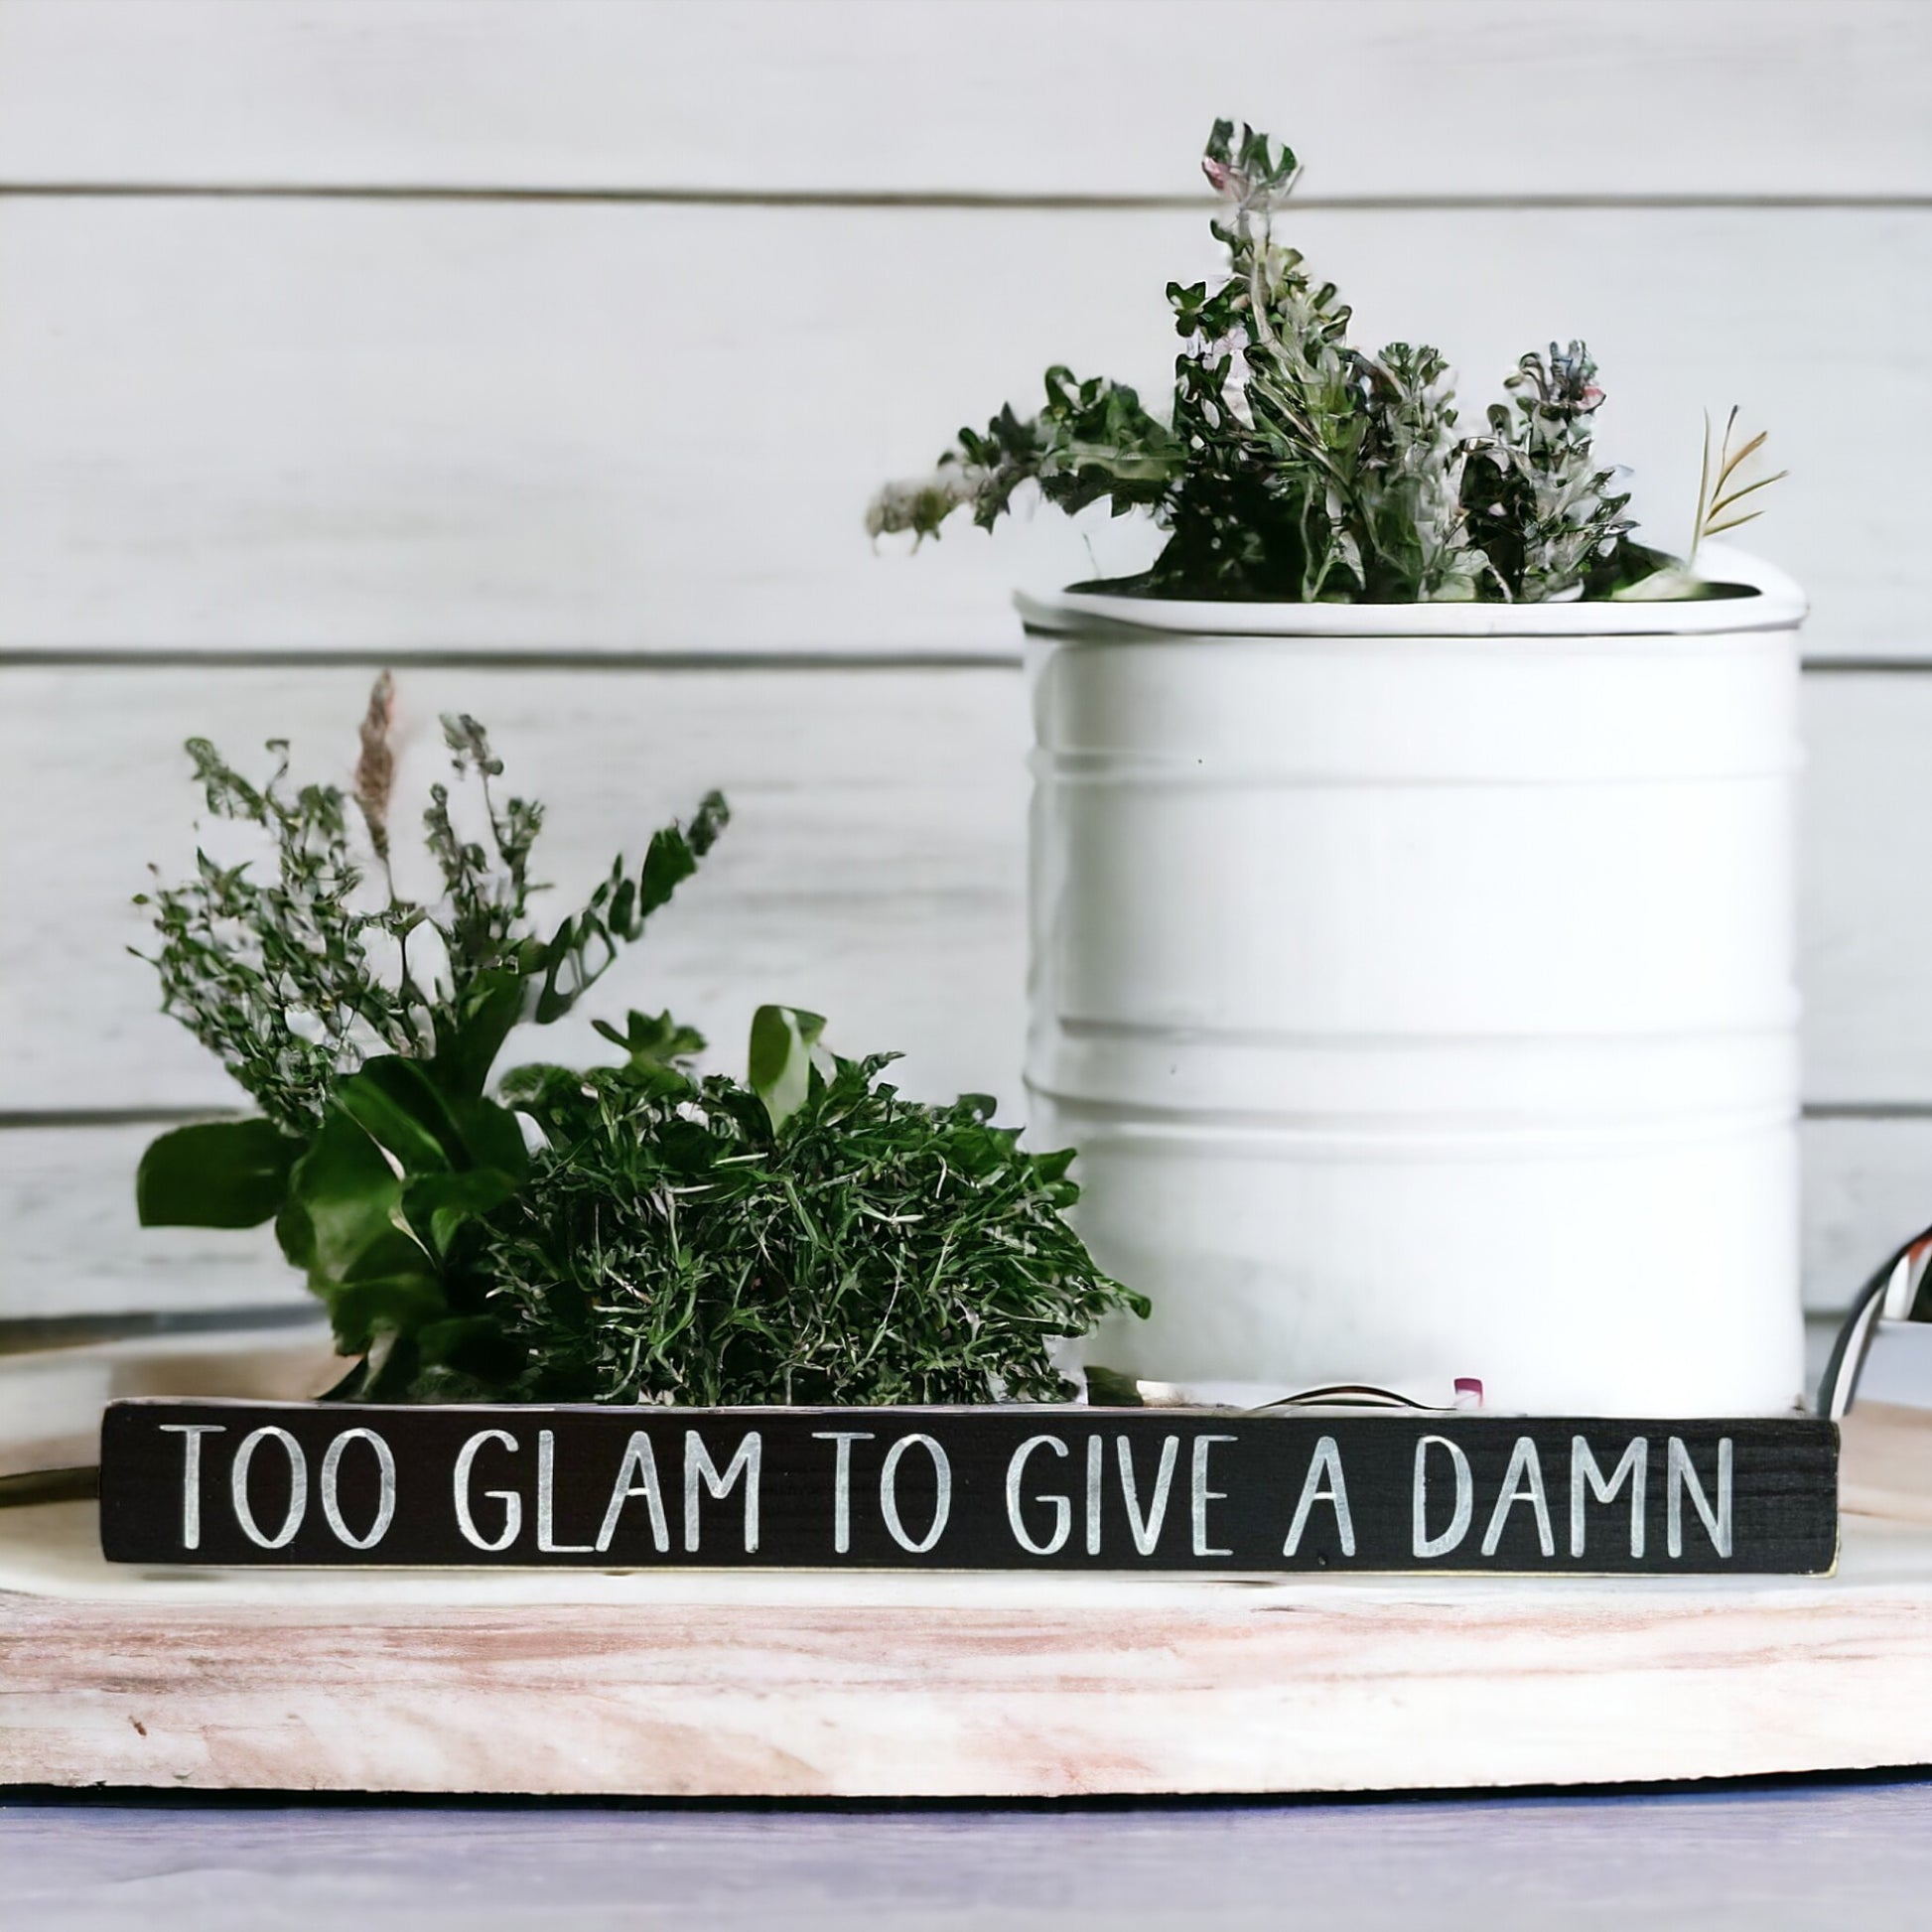 Handpainted black wood sign with white text reading 'Too Glam To Give A Damn,' freestanding 16-inch sarcastic decor for female office or home.